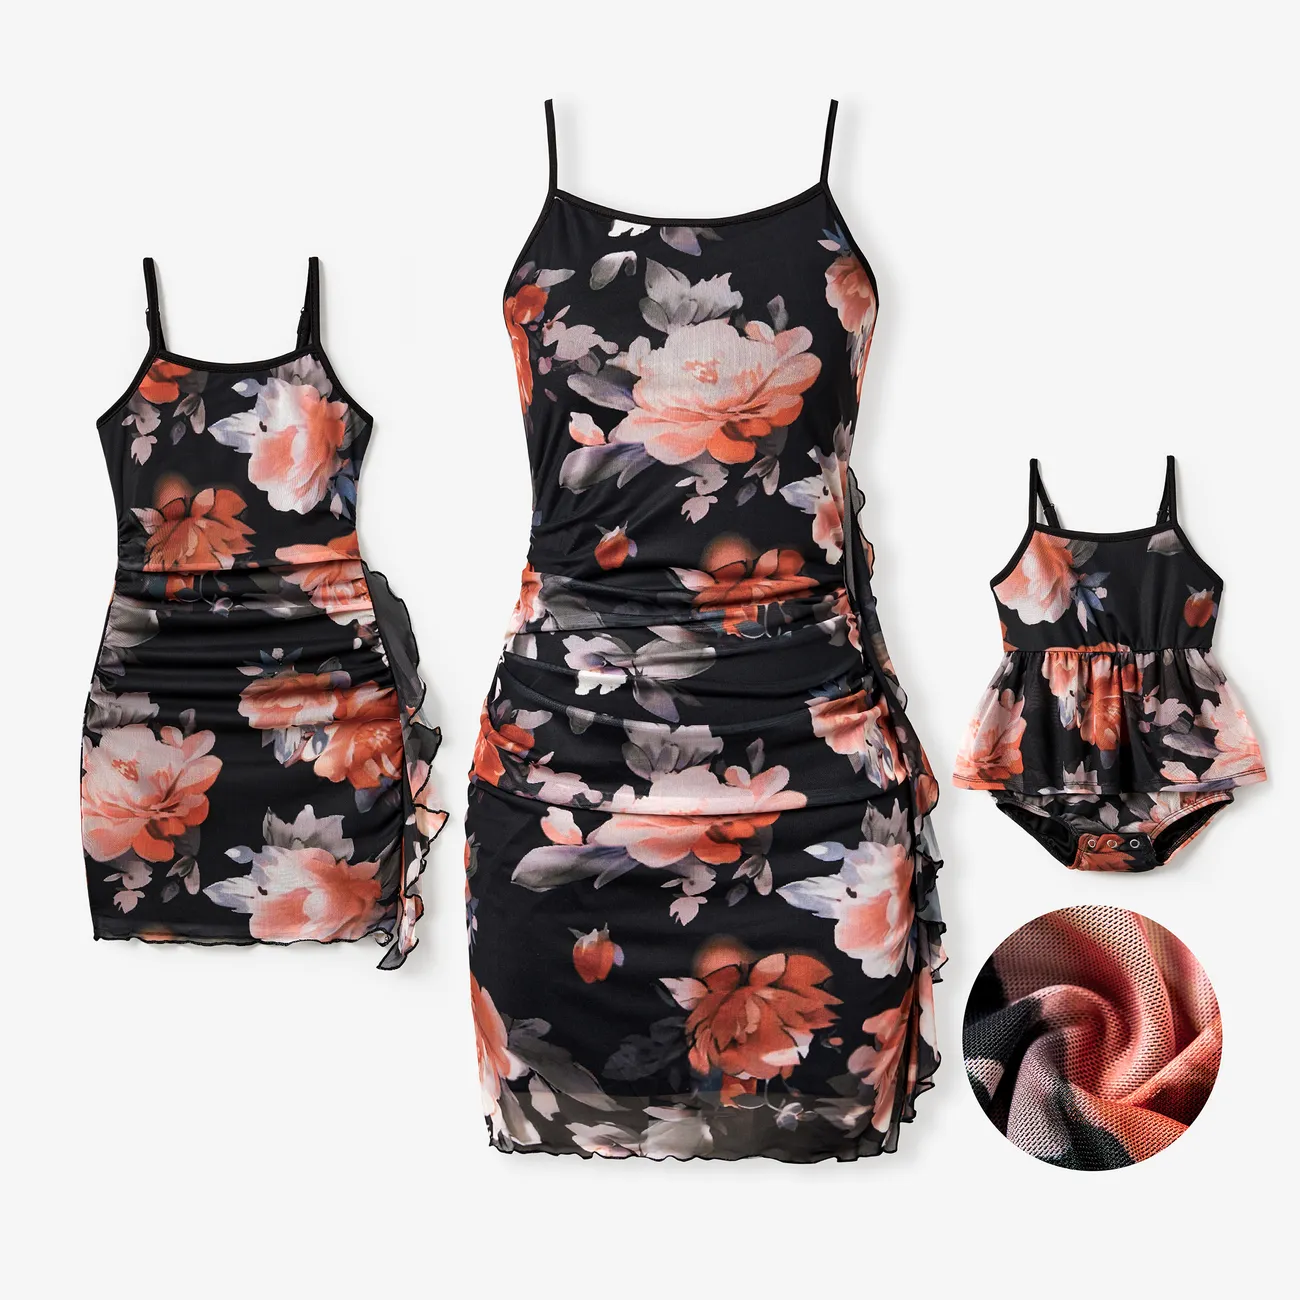 Mommy and Me Vintage Floral Mesh Bodycon Strap Dress with Ruffle Accents Side Black big image 1